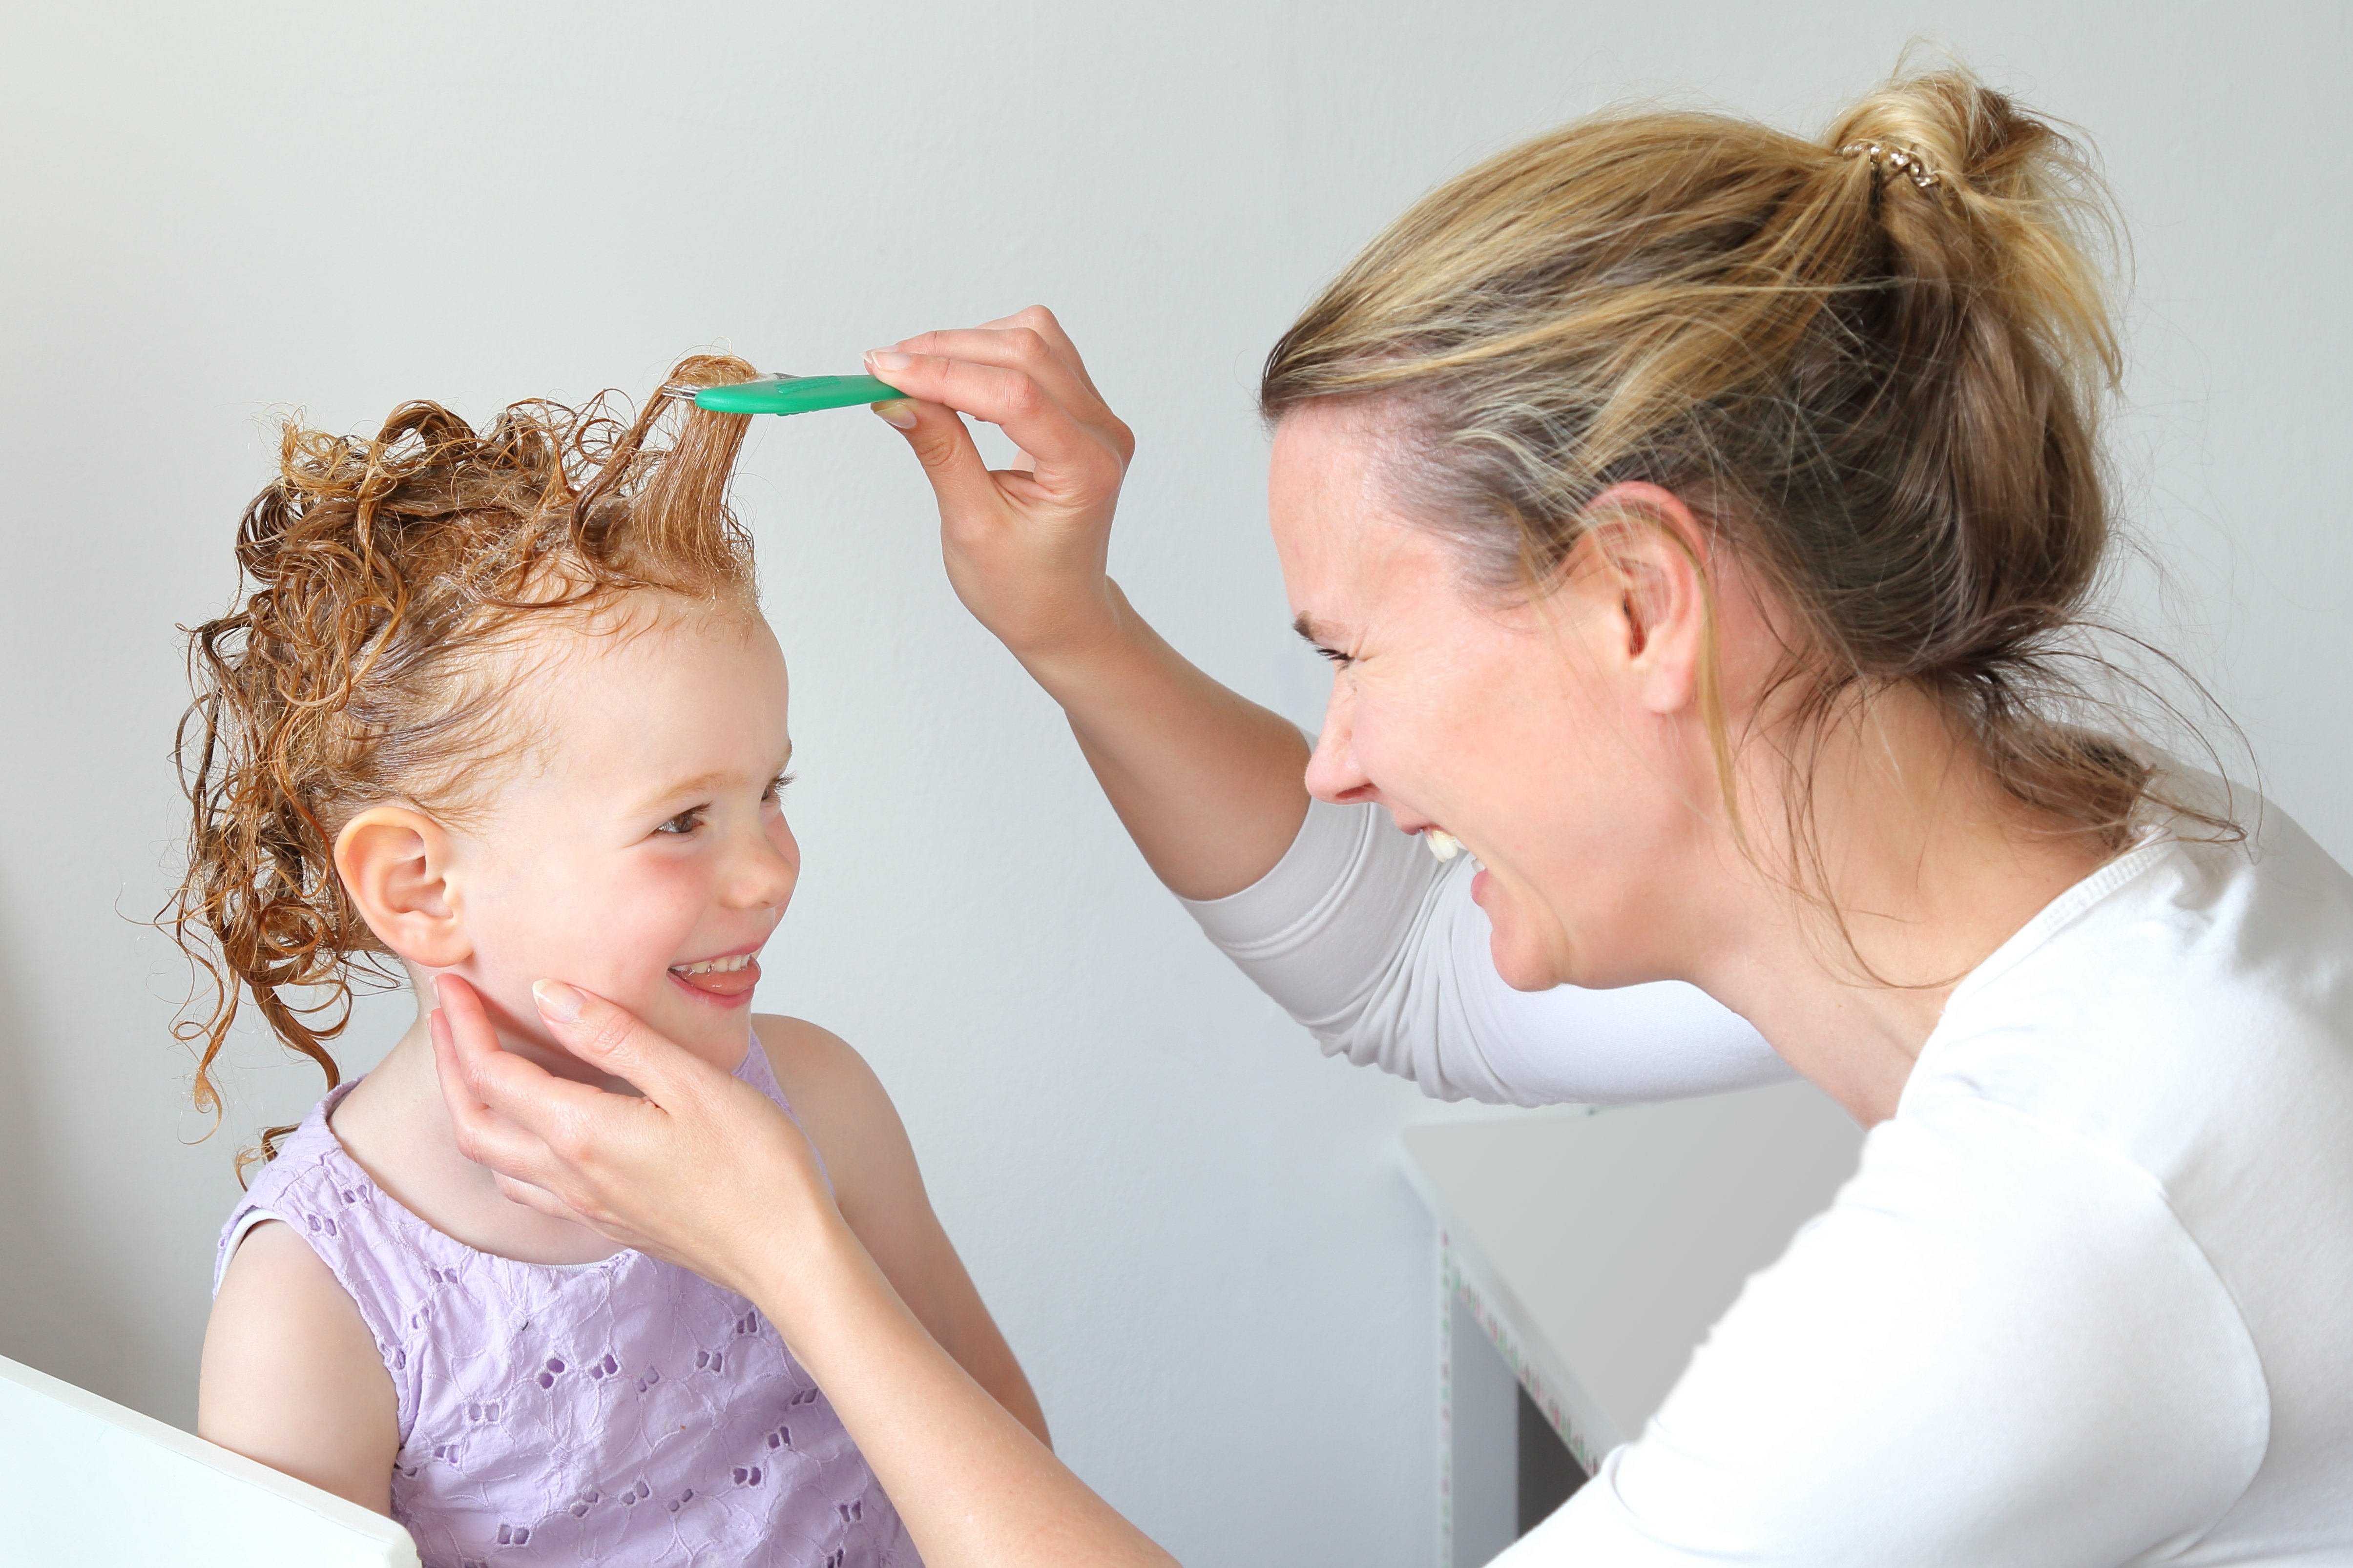 Washing out Head lice in the hair of a child | Photo: Shuttershock